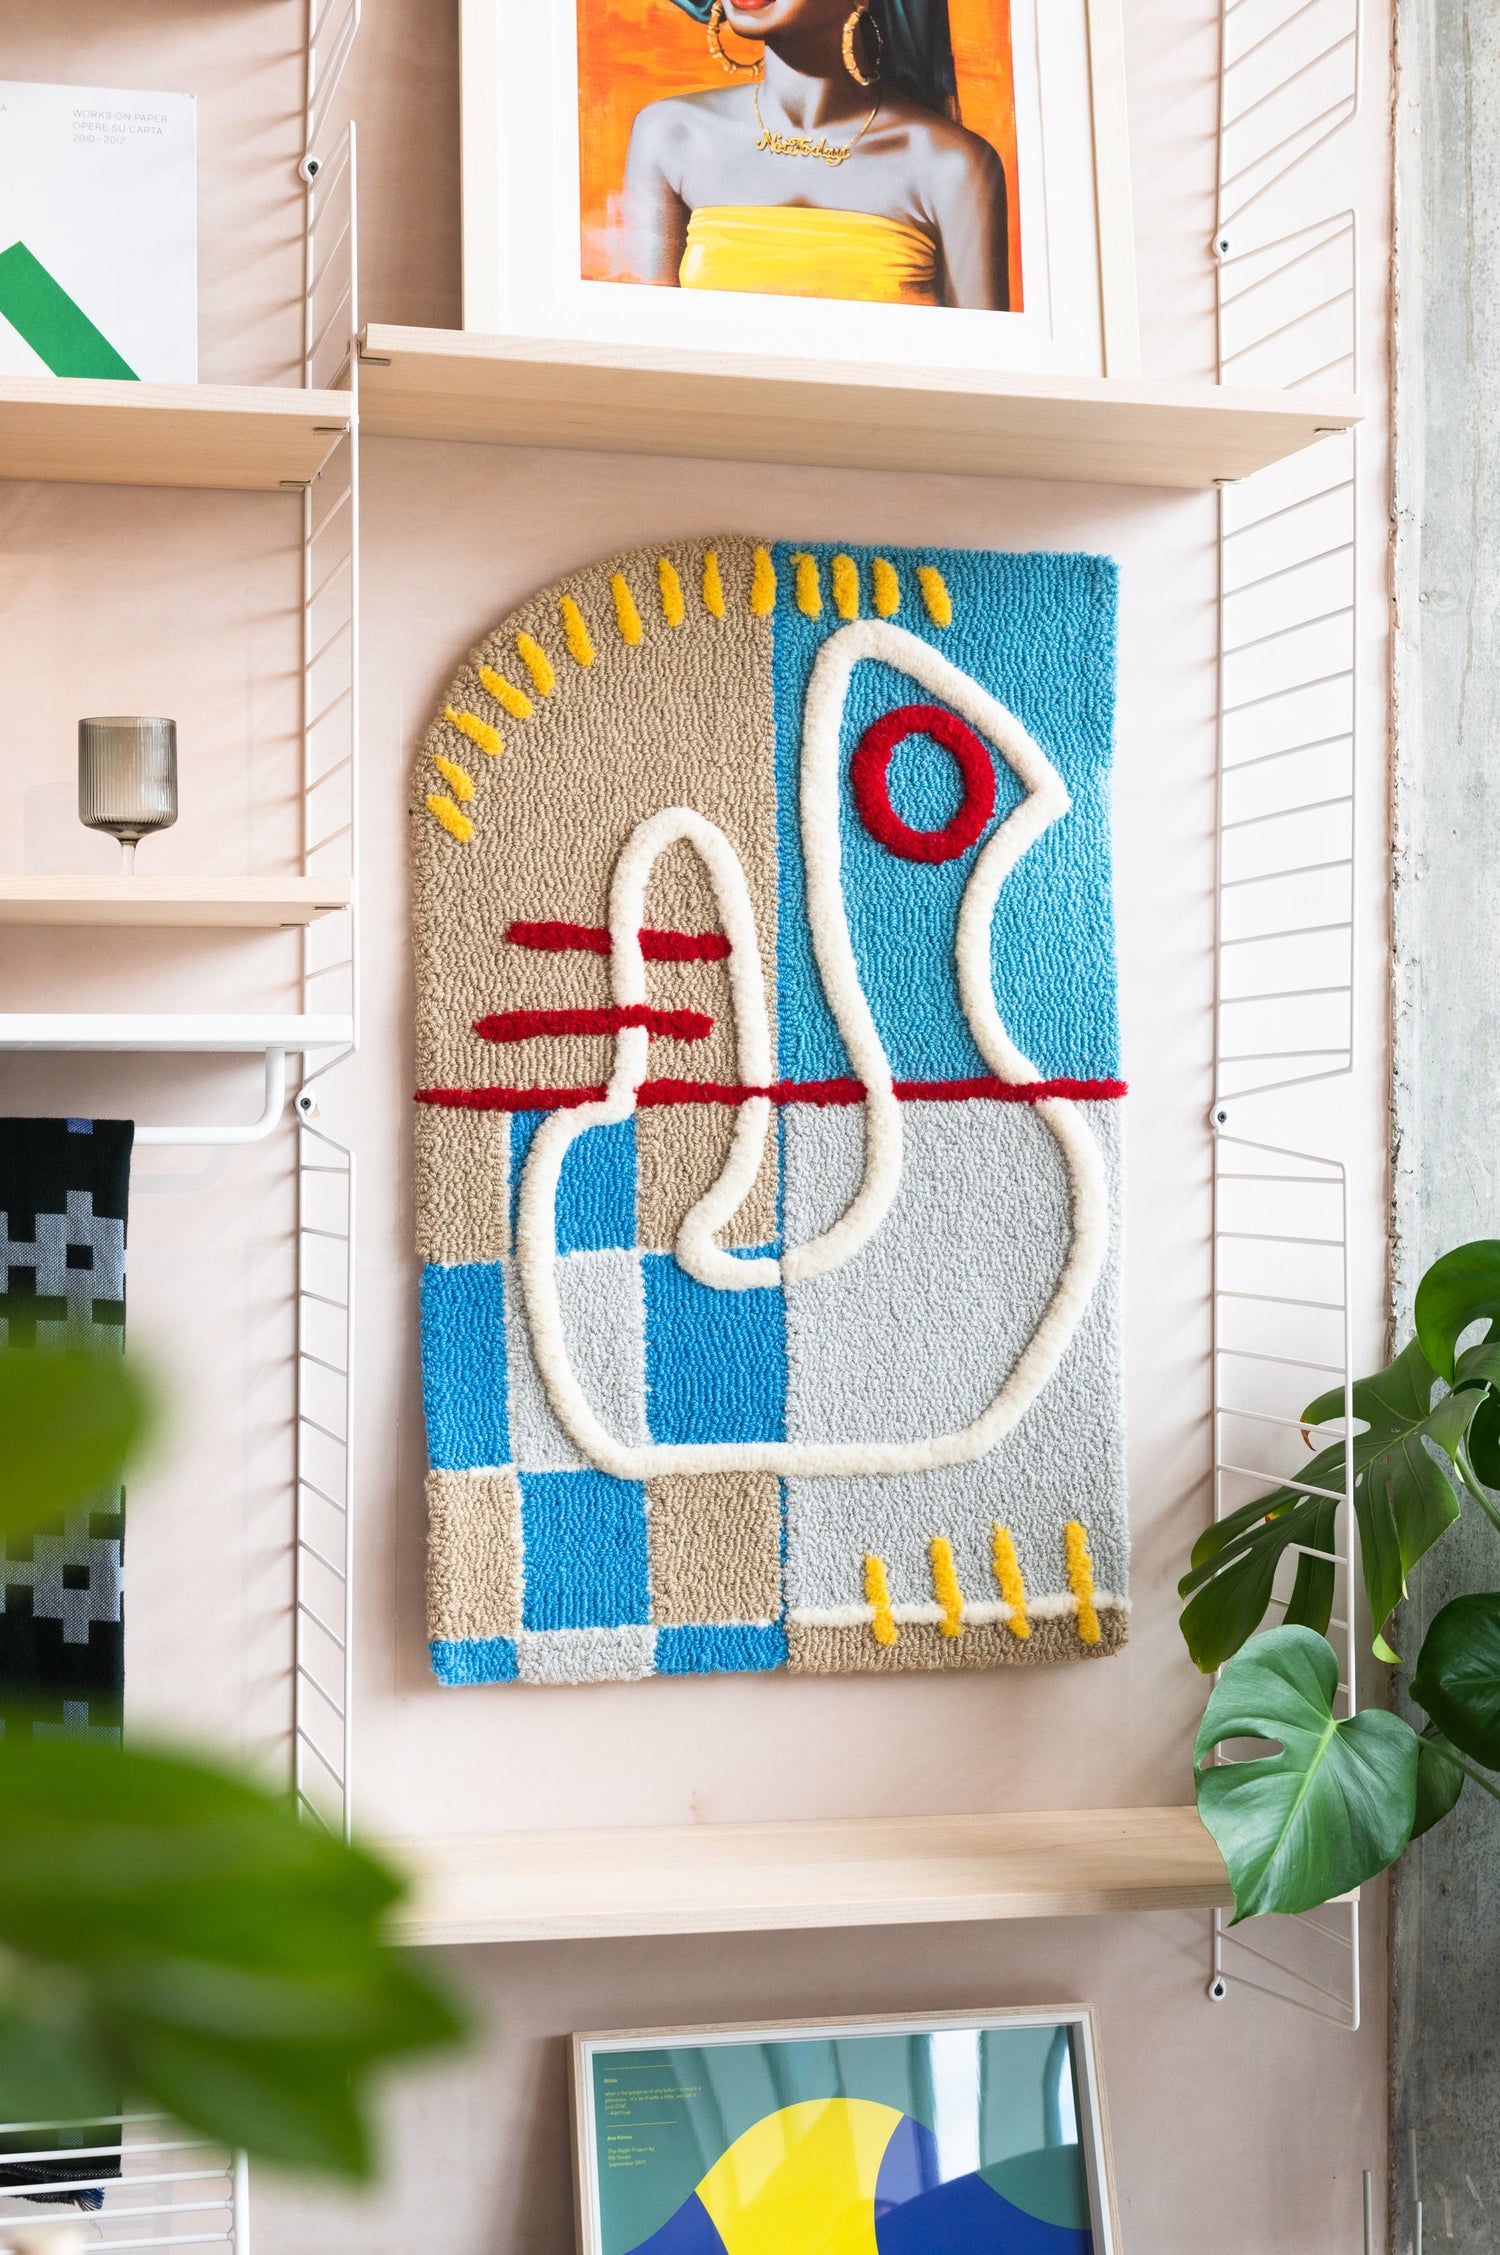 An artistic wool wall hanging shown among plants and shelves.